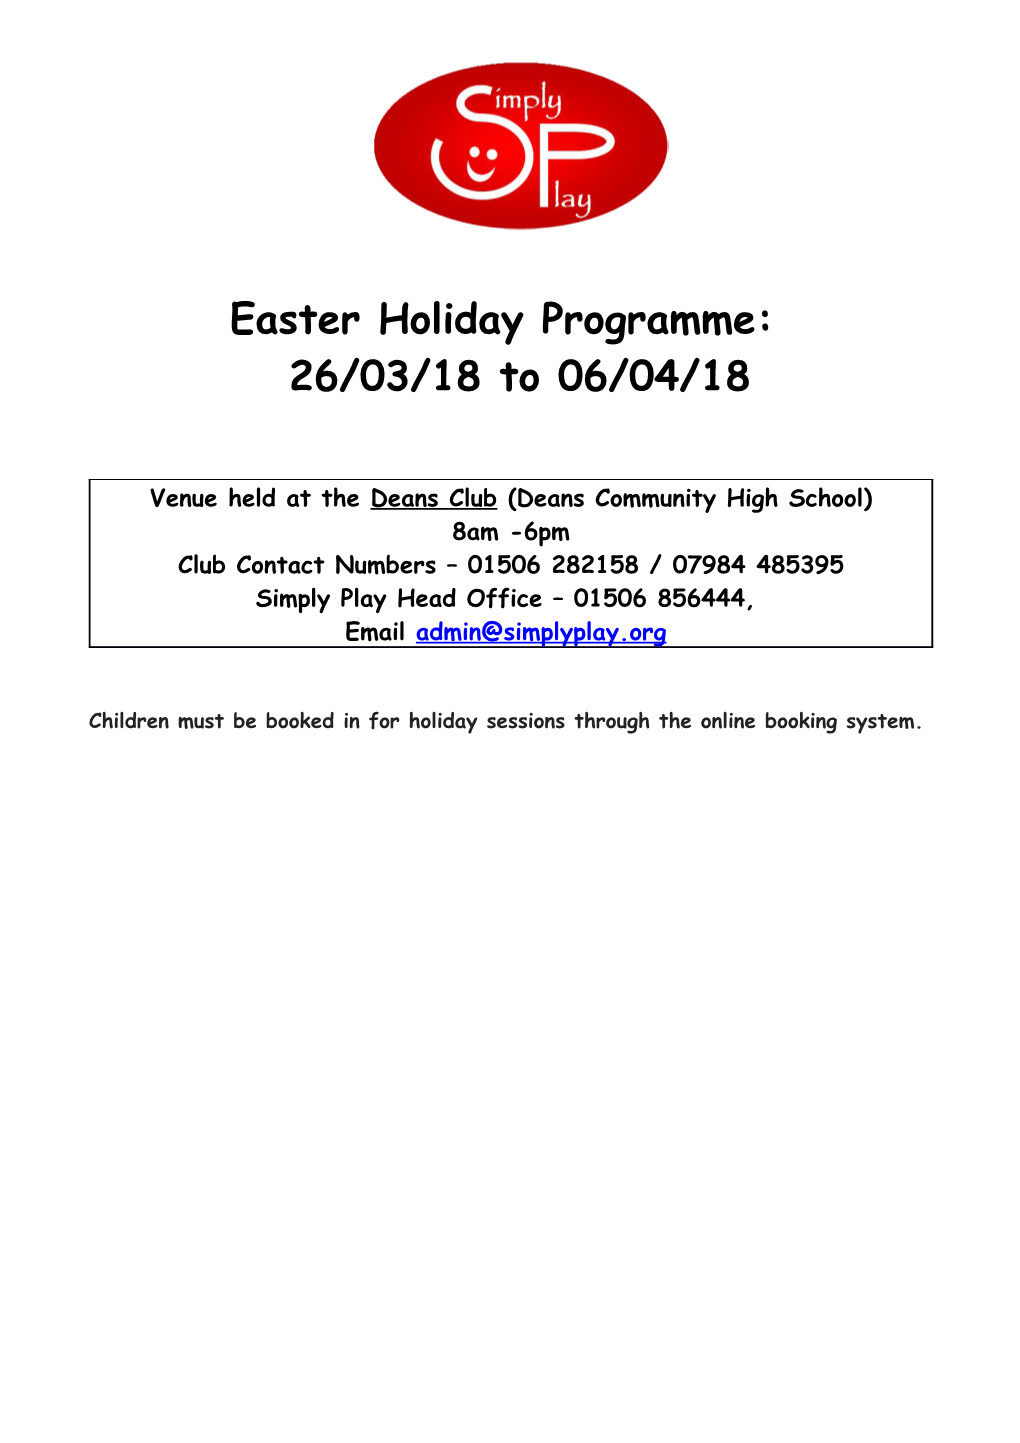 Children Must Be Booked in for Holiday Sessions Through the Online Booking System